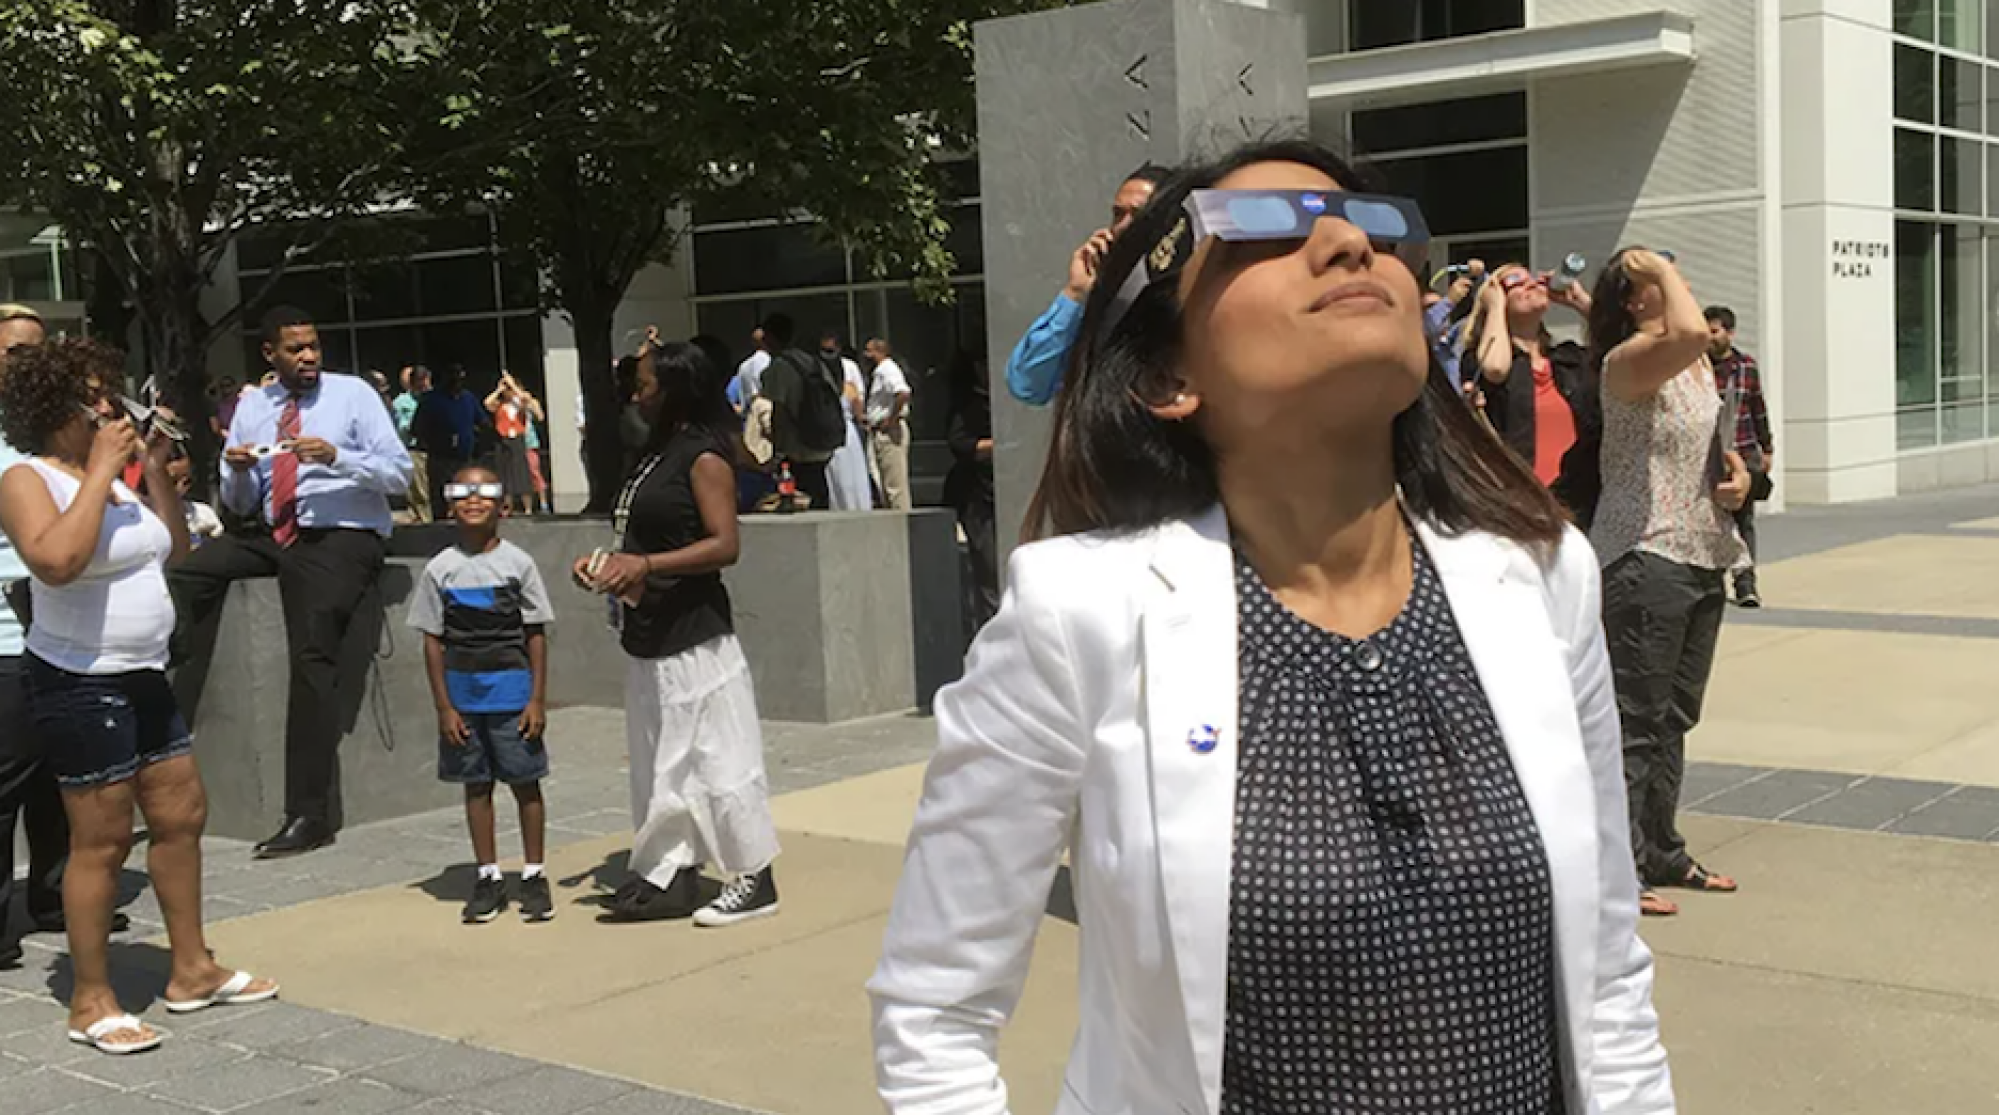 A woman views the eclipse with eclipse glasses.